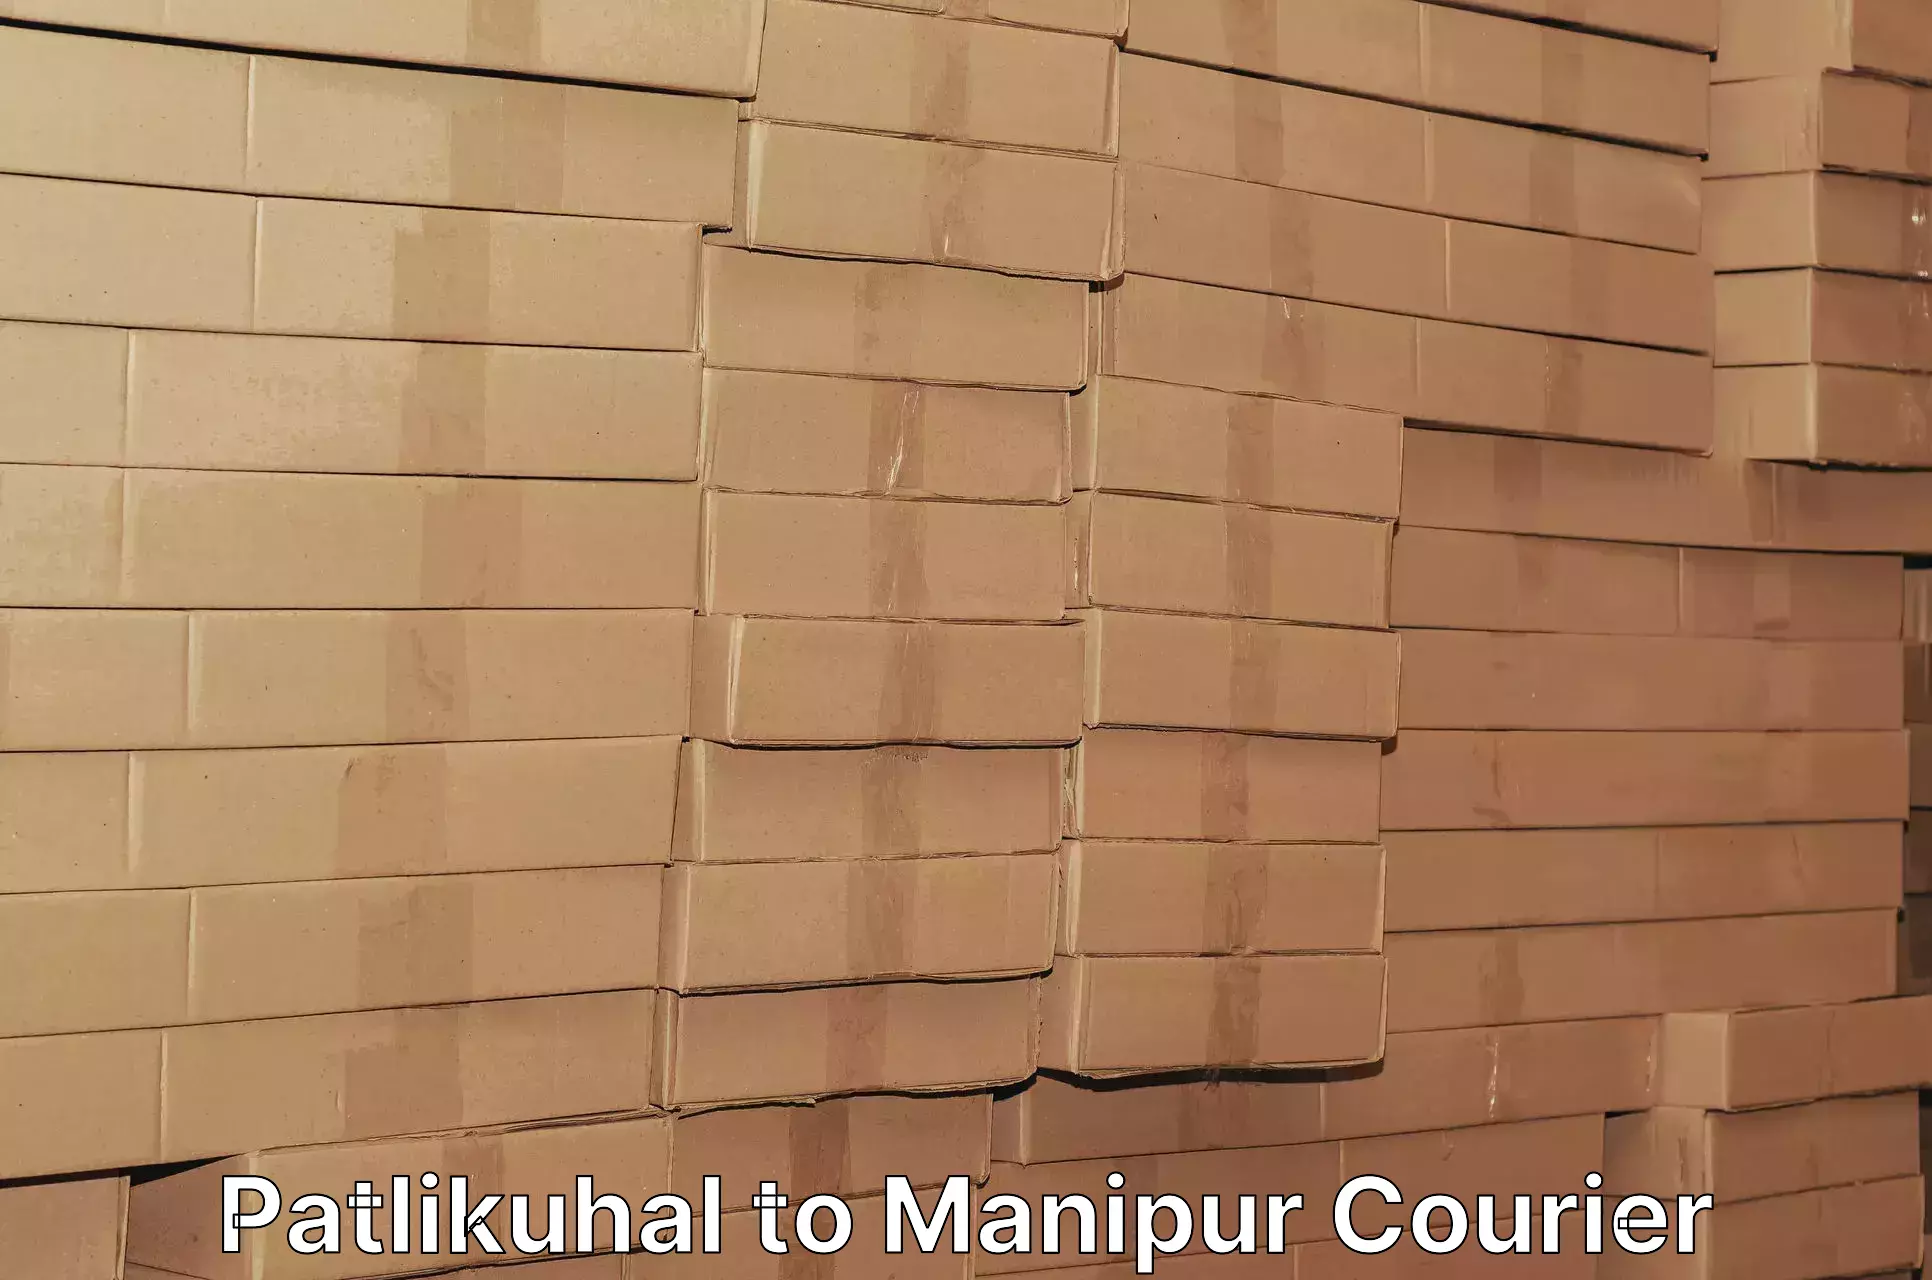 Global shipping networks Patlikuhal to Manipur